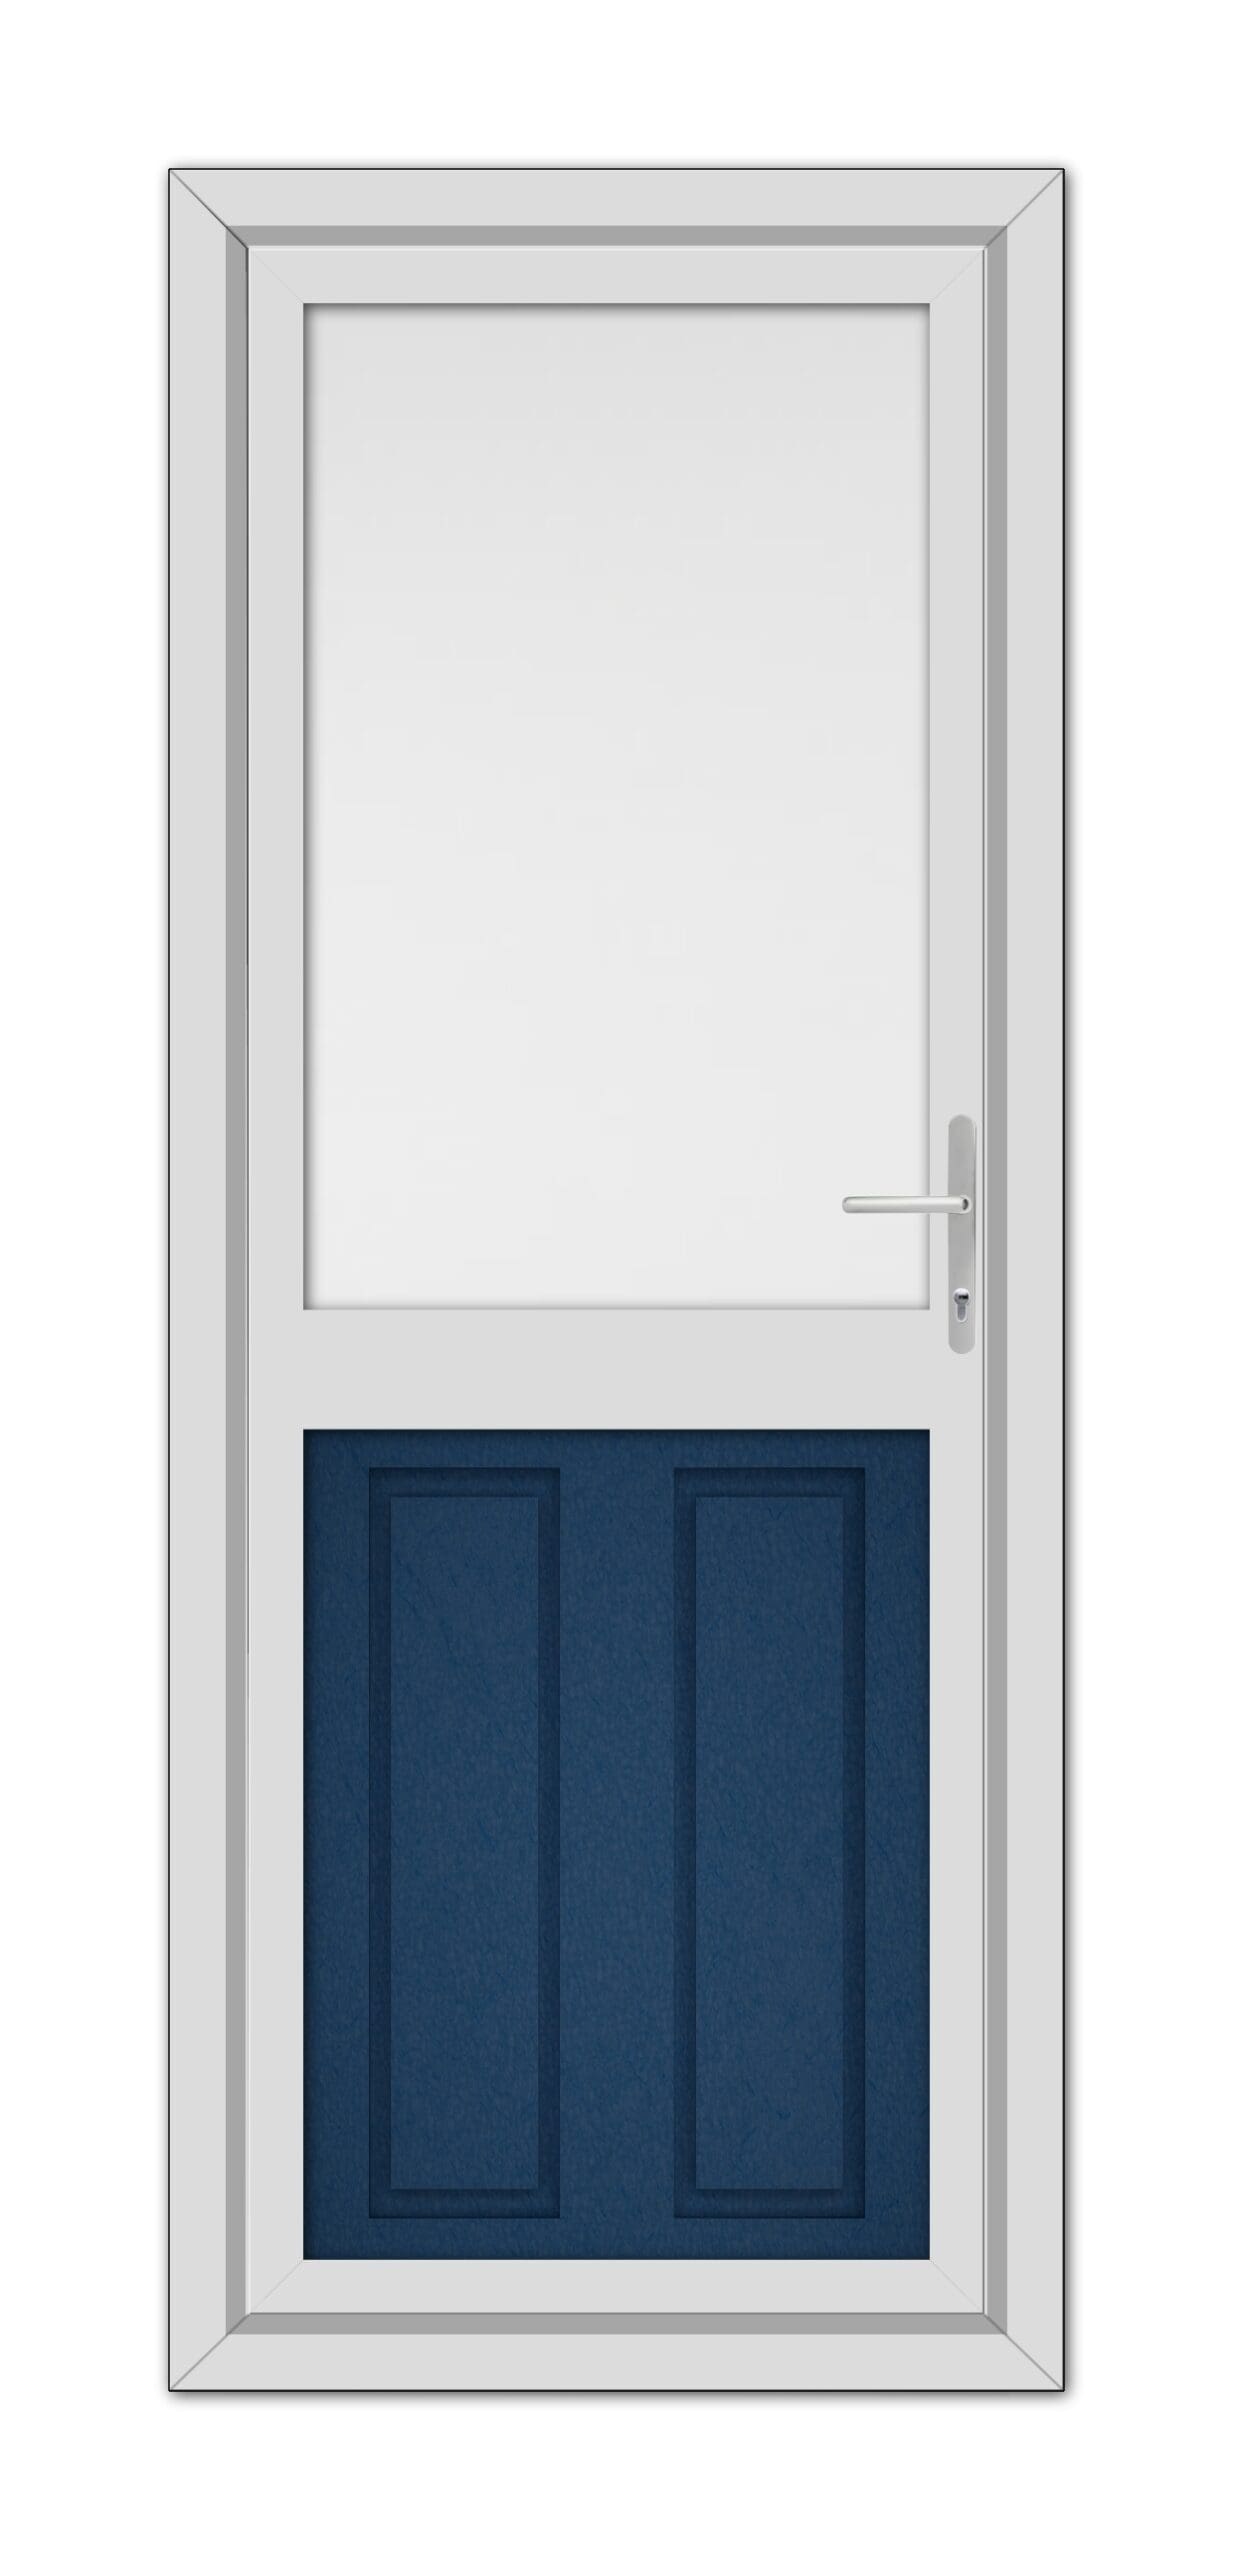 A modern White Manor Half uPVC Back Door with a small, square window at the top and two Blue panels at the bottom, fitted with a silver handle on the right side.